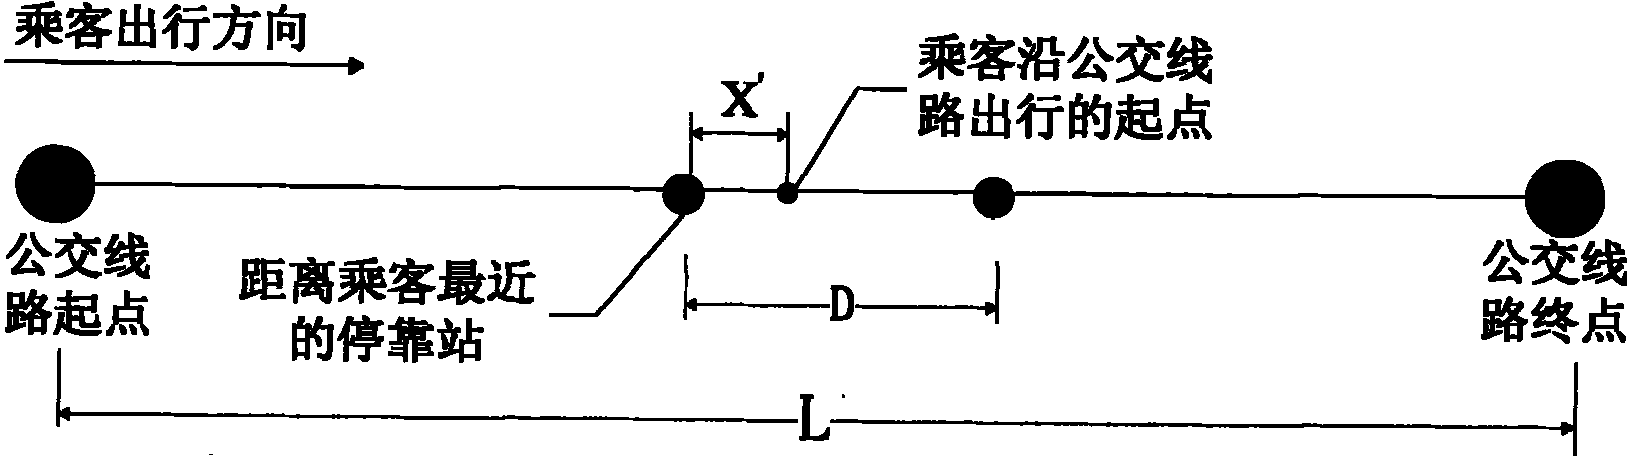 Method for setting stop stations of urban bus line